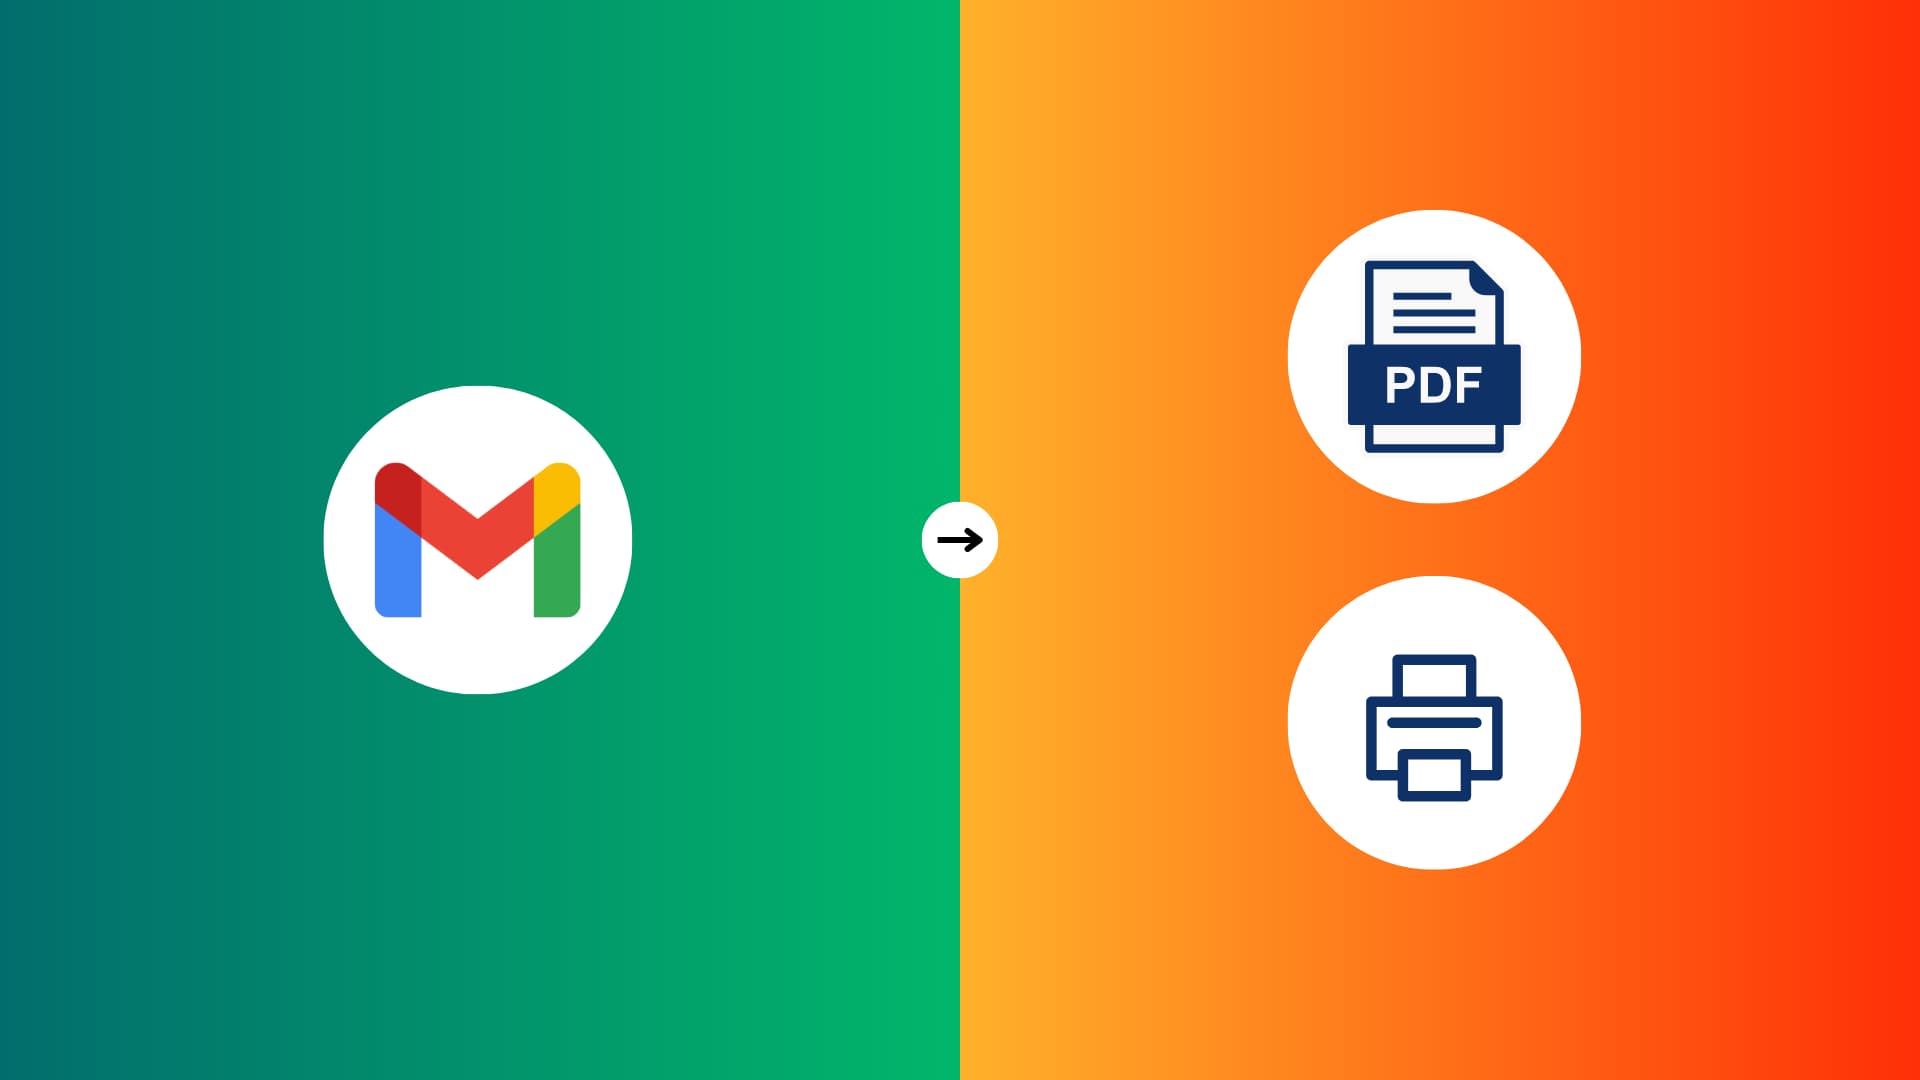 Illustration to show an email on Gmail being saved as a PDF or print